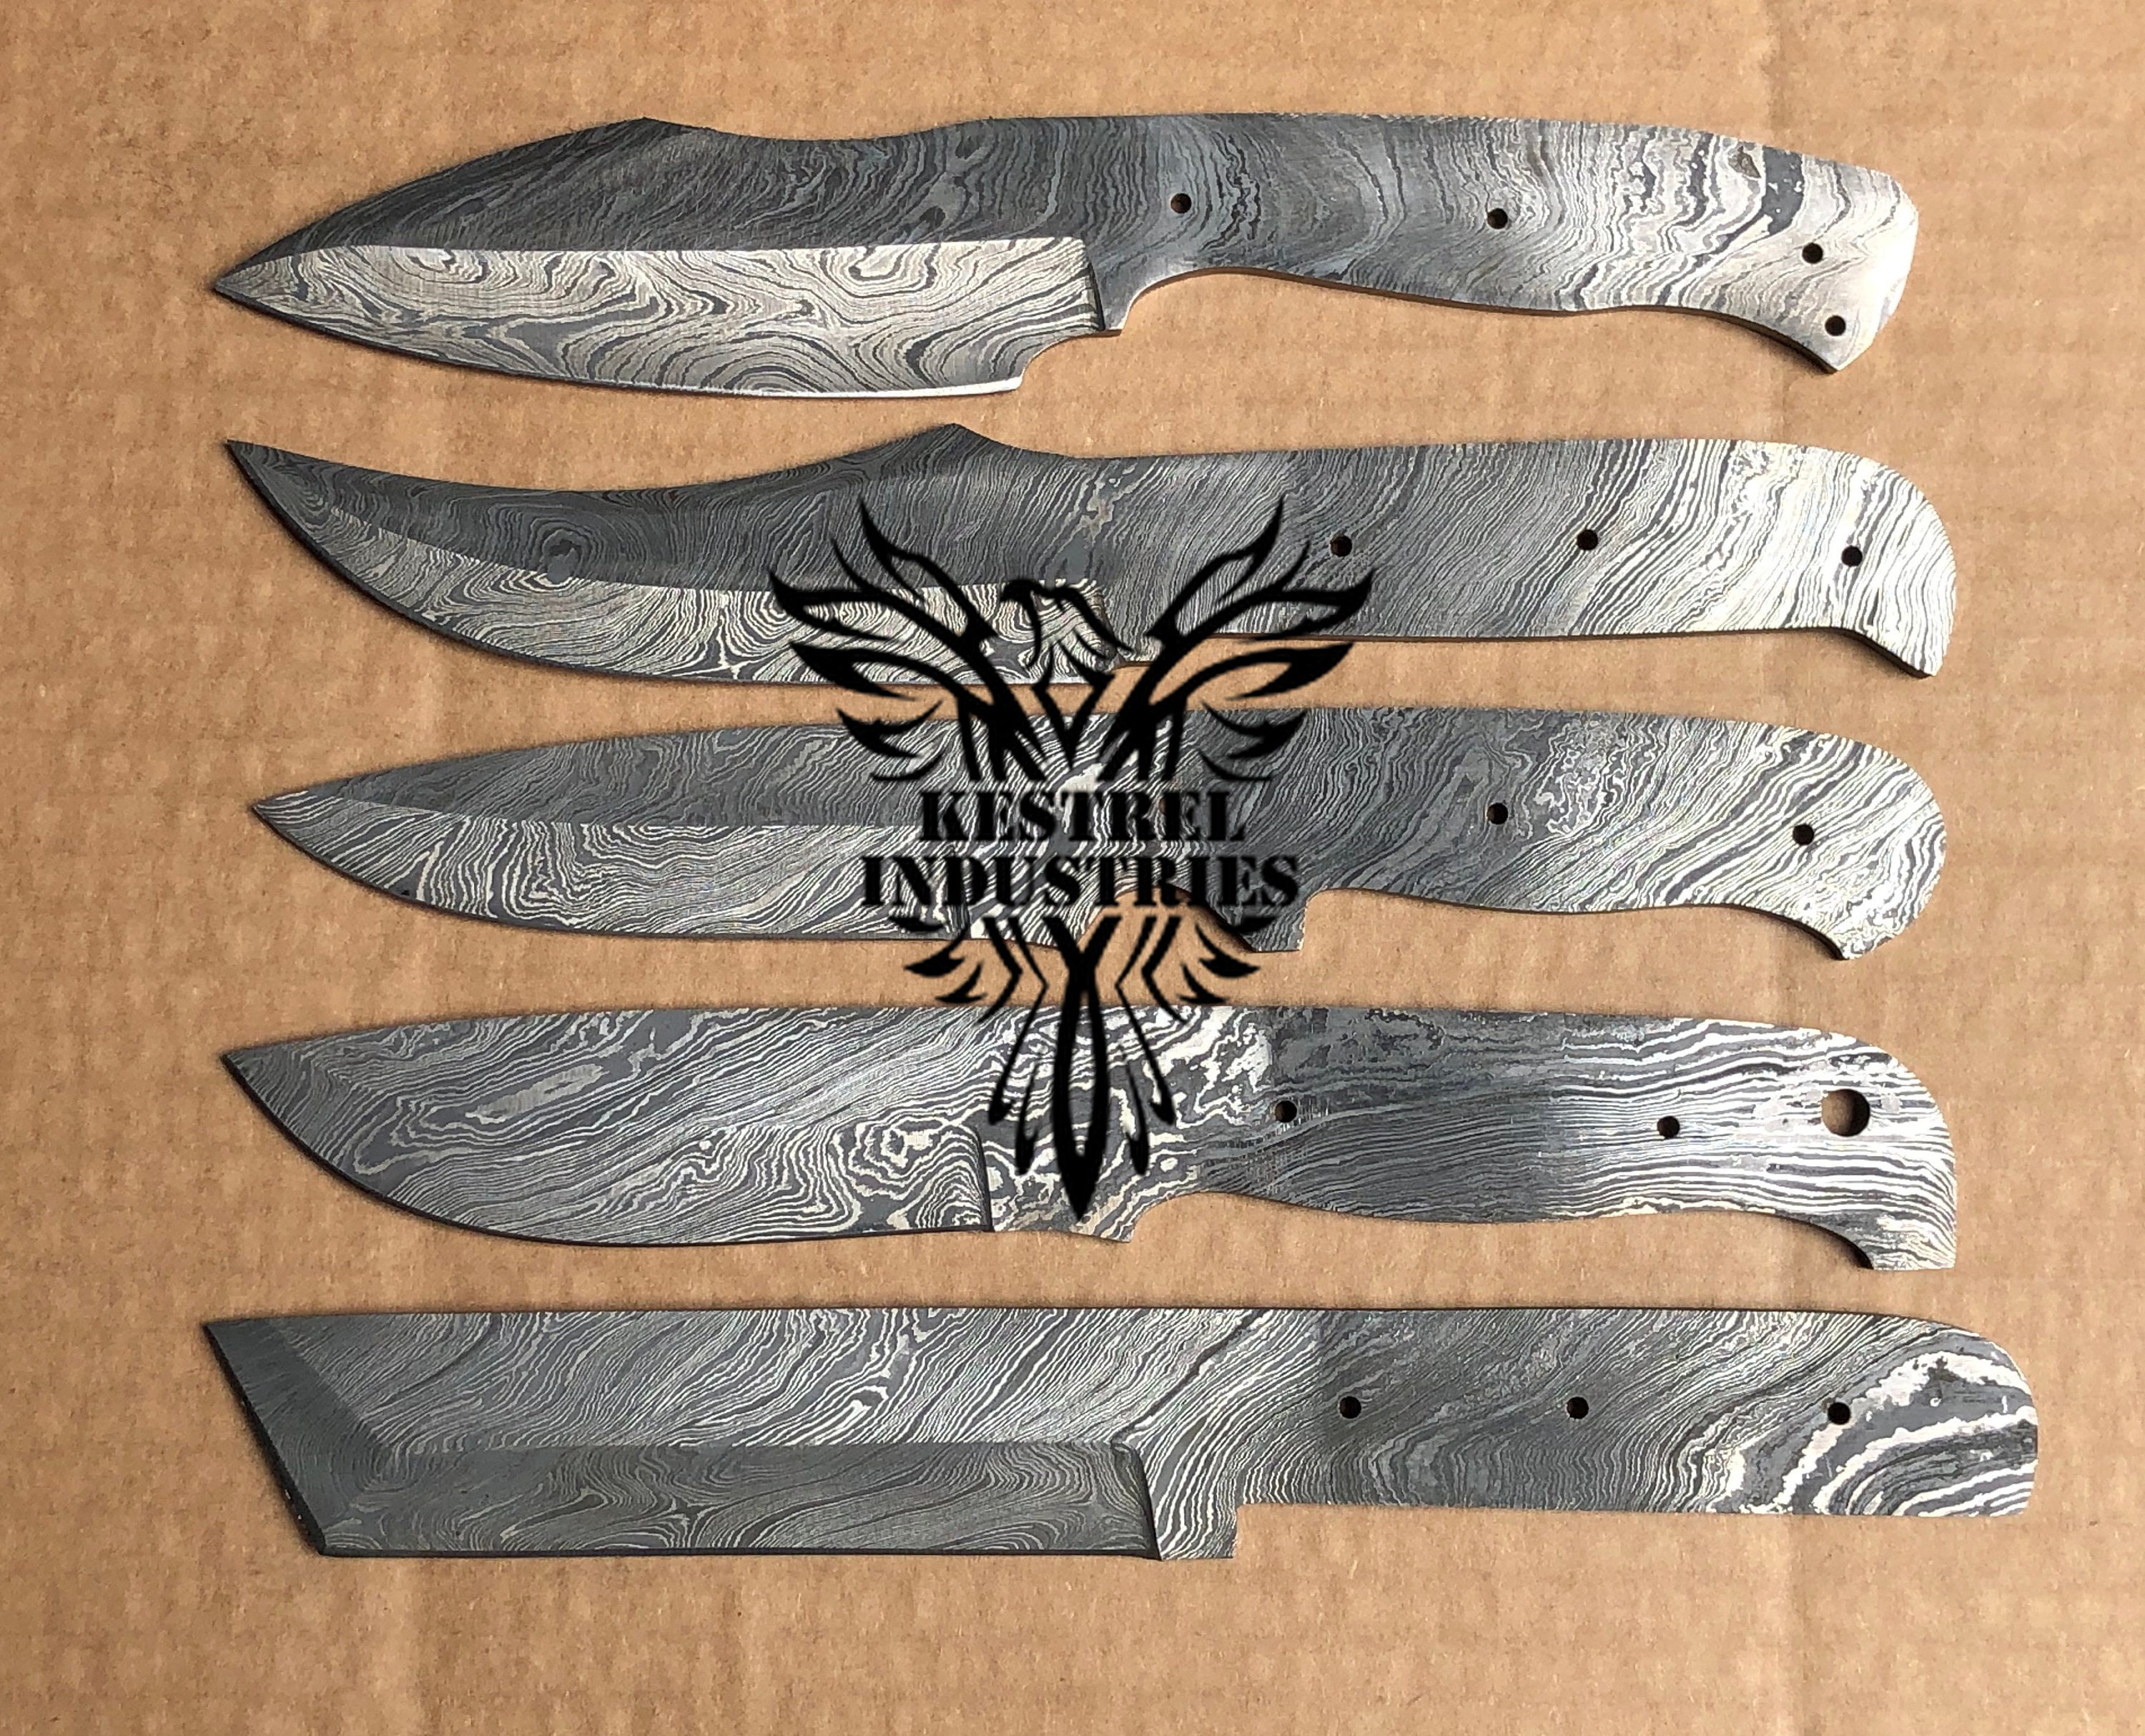 Lot of 5 Damascus Steel Blank Blade Knife for Knife Making Supplies SU-139  